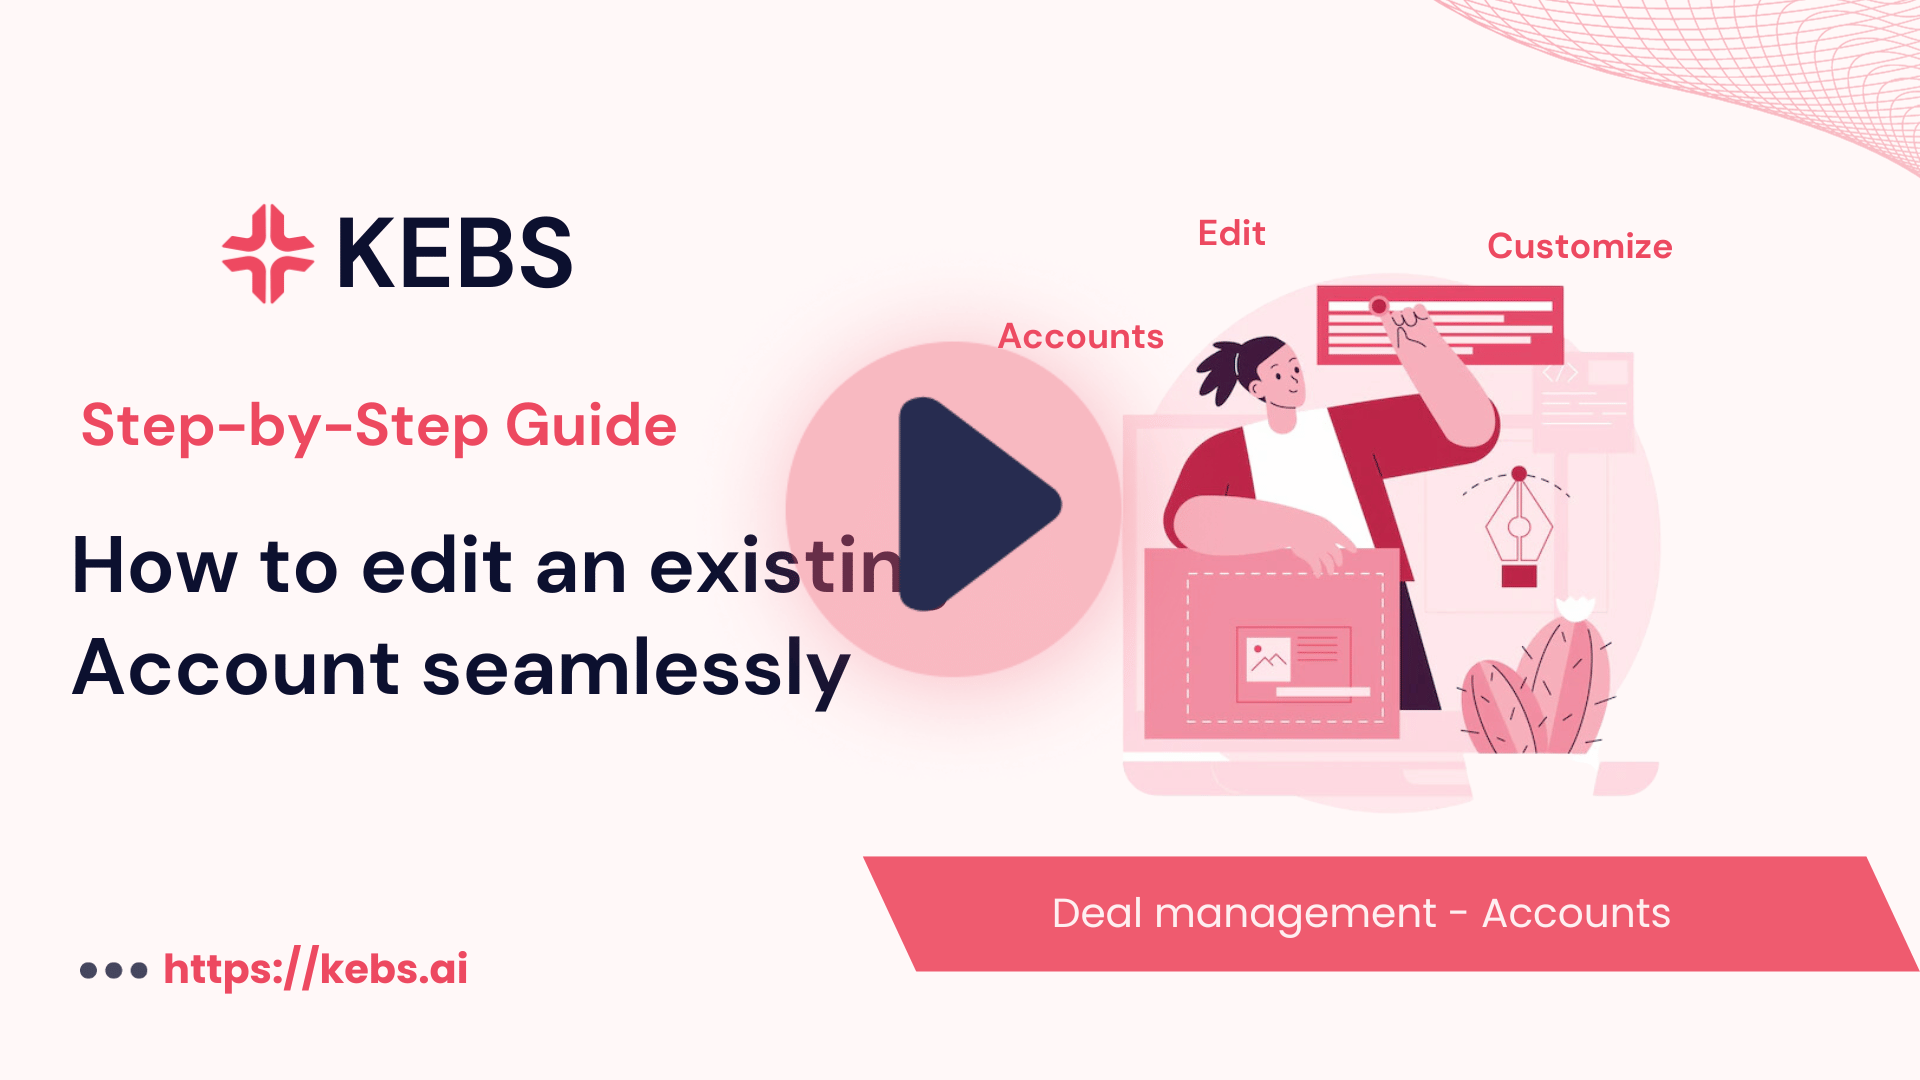 How to edit an existing Account seamlessly